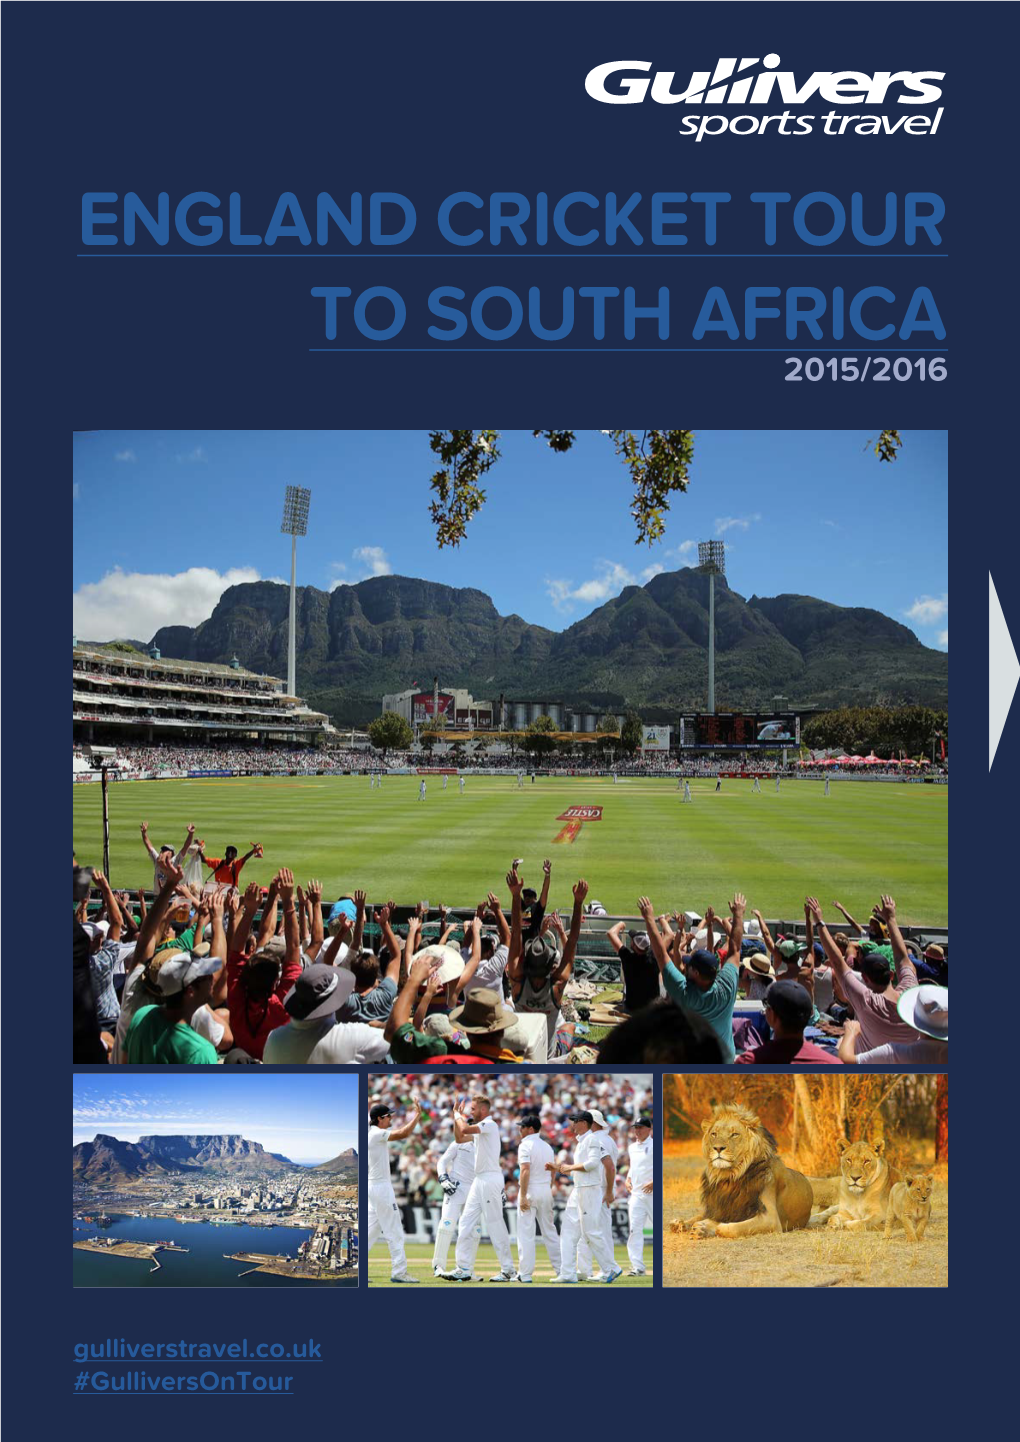 England Cricket Tour to South Africa 2015/2016